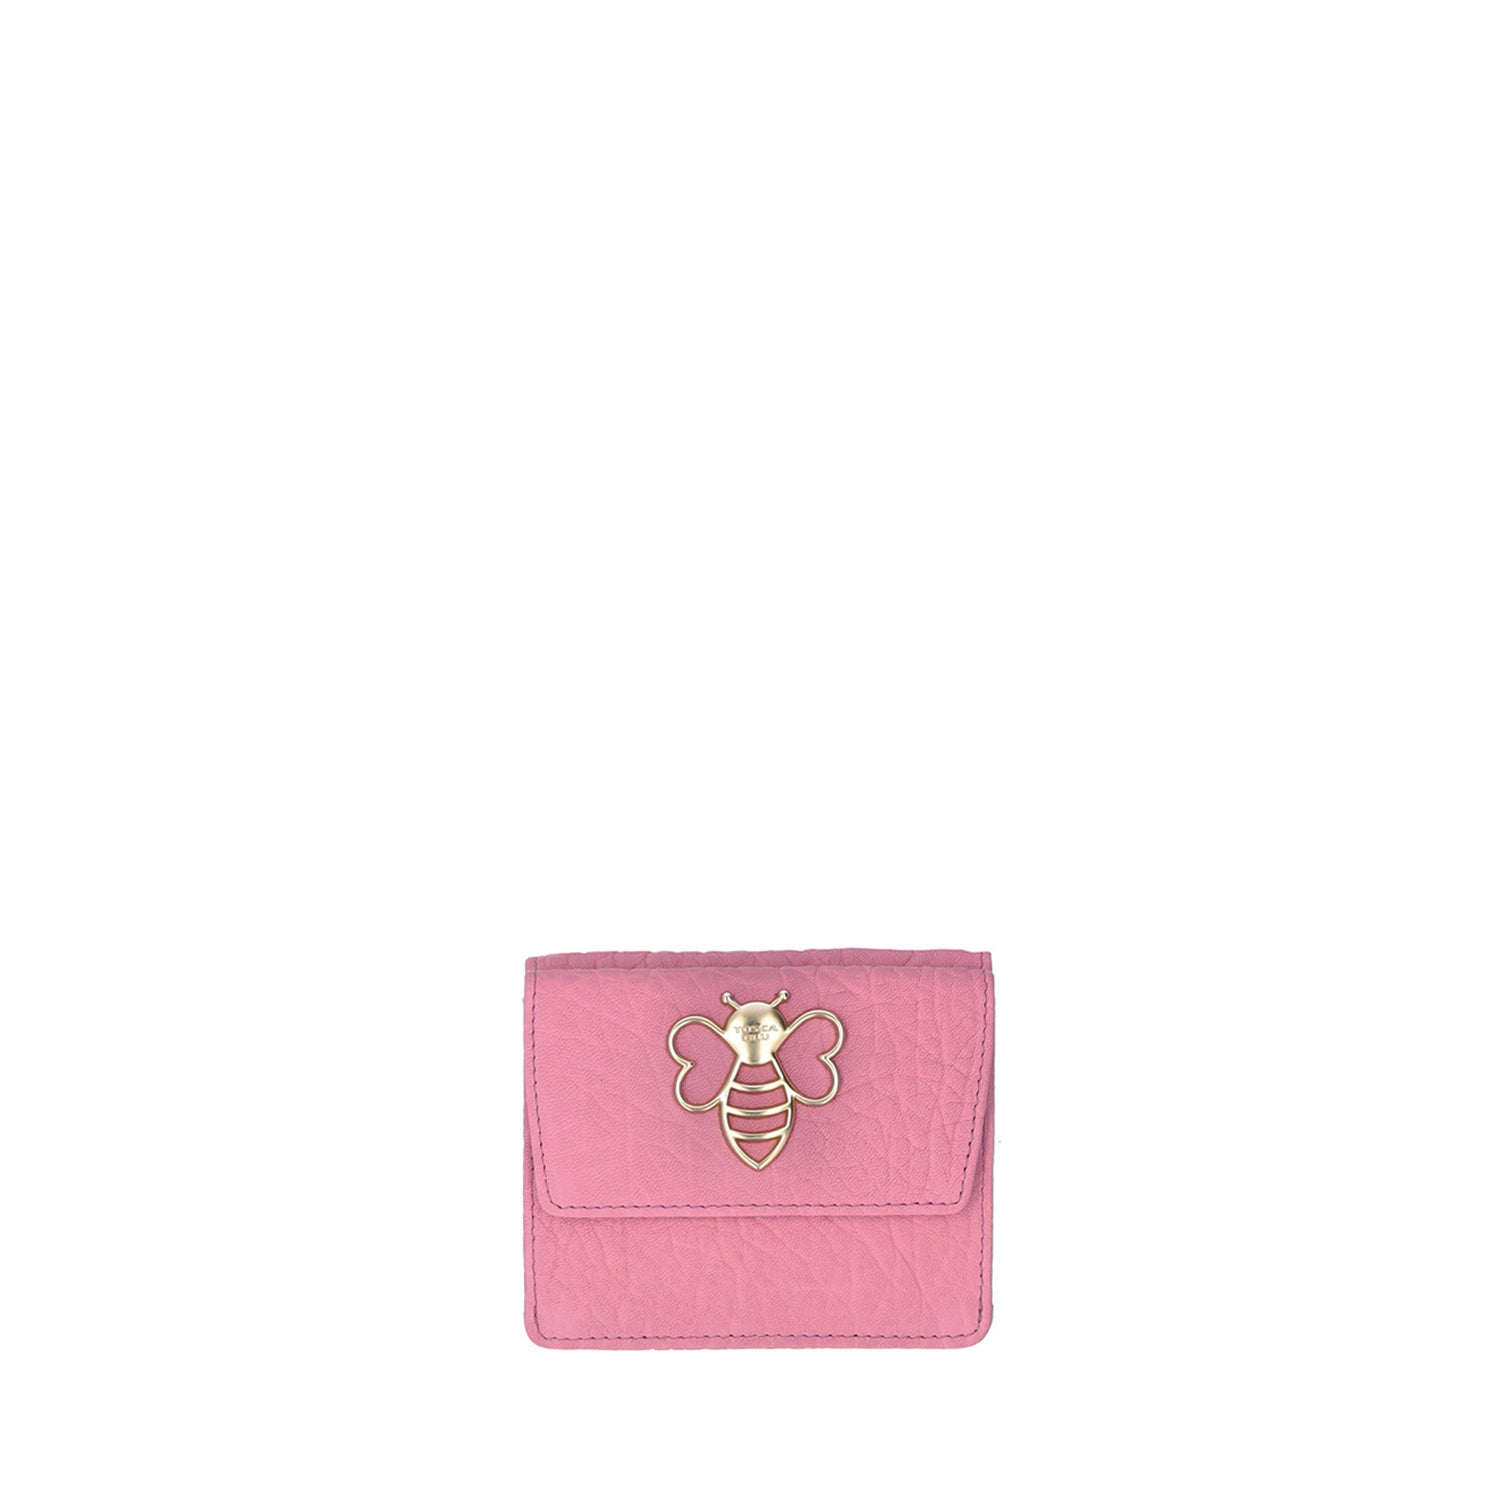 PINK SMALL GLADIOLO LEATHER WALLET